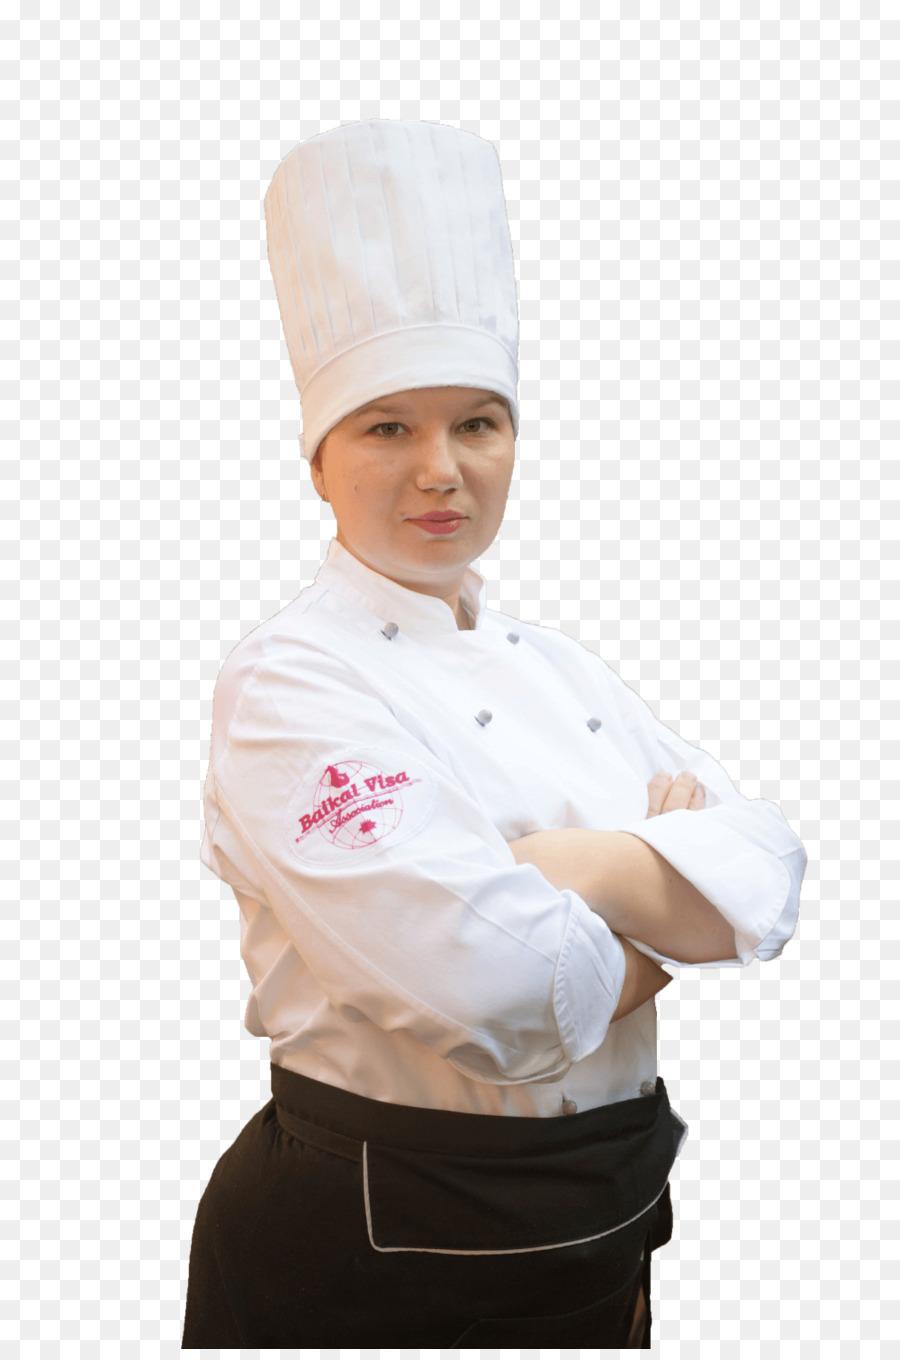 Free Chef Transparent Background, Download Free Chef Transparent ...